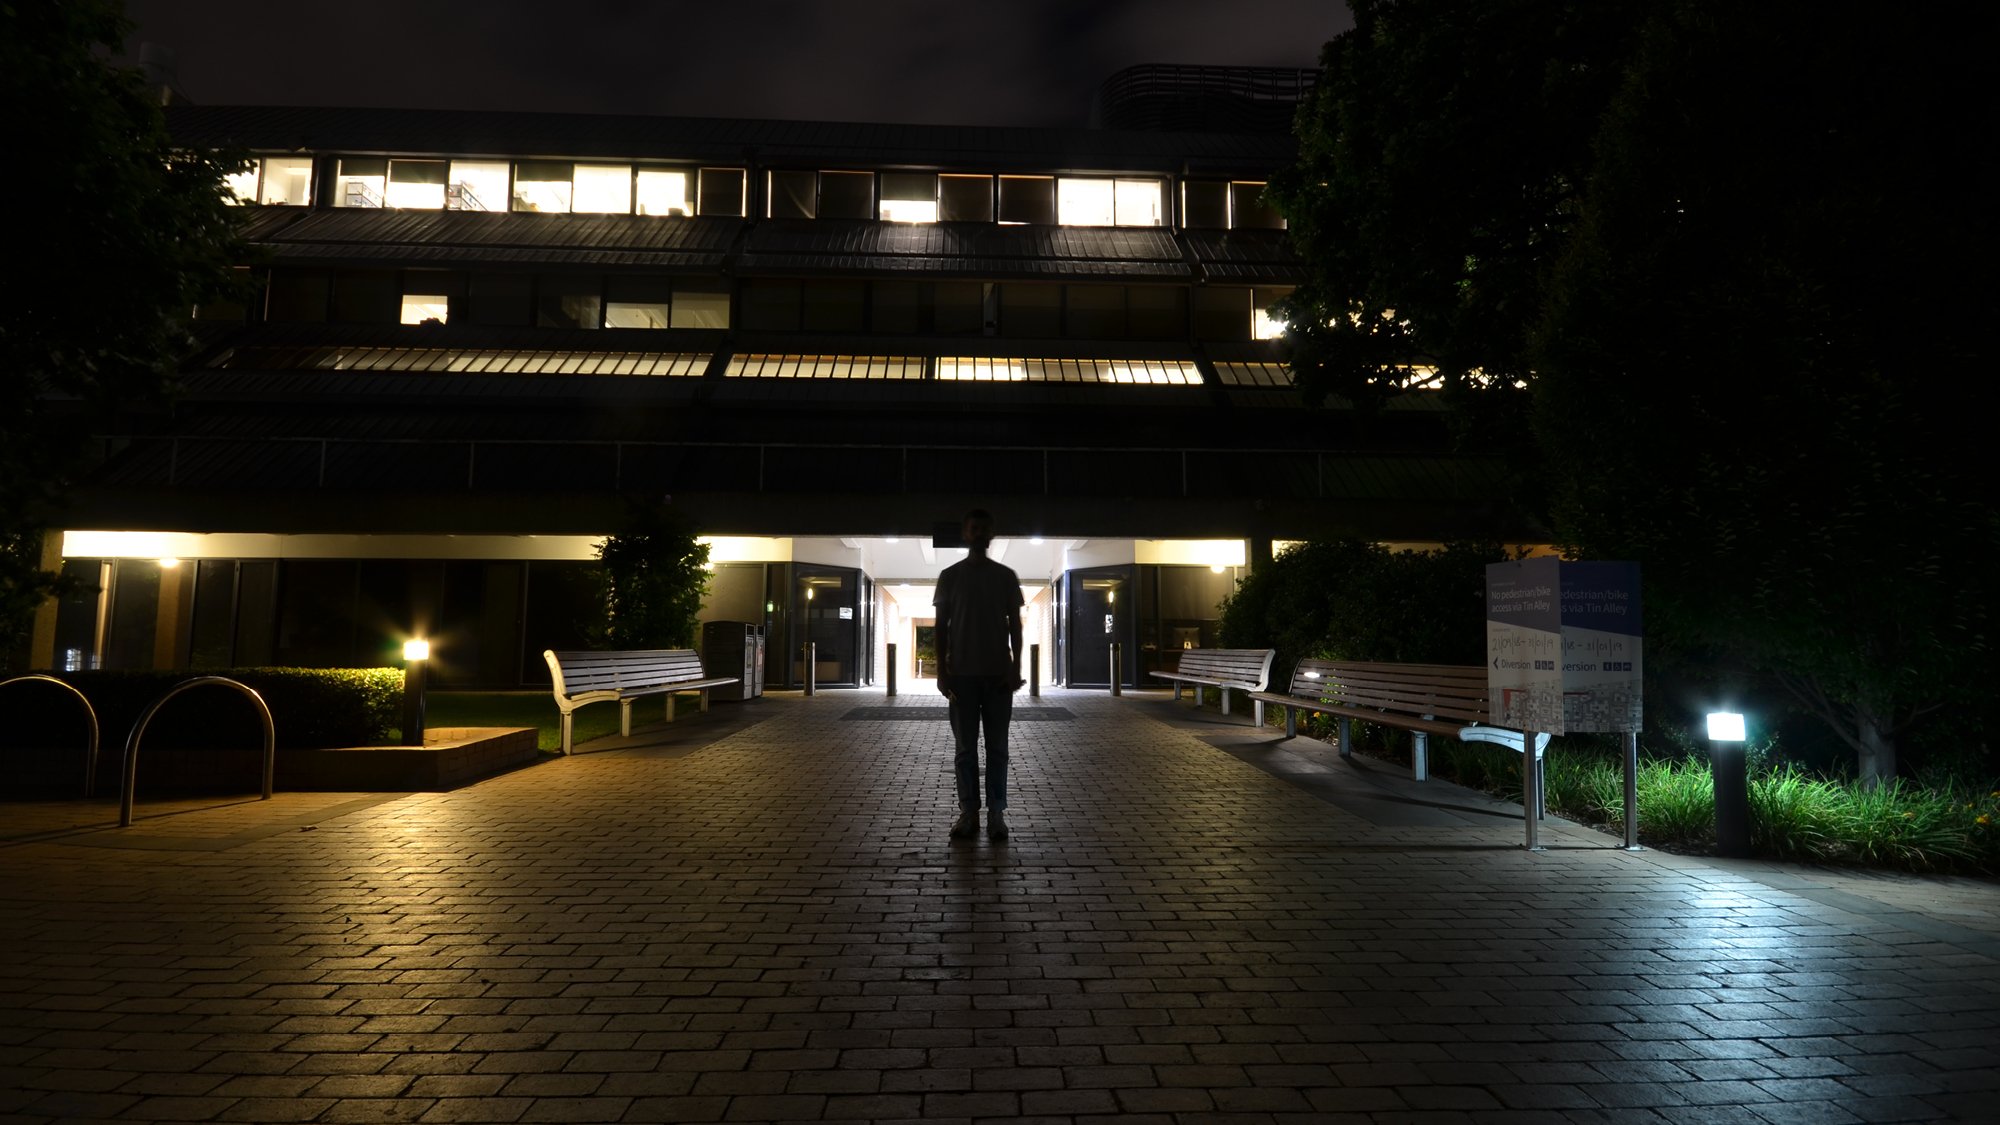 Man standing in front of poorly lit building at night